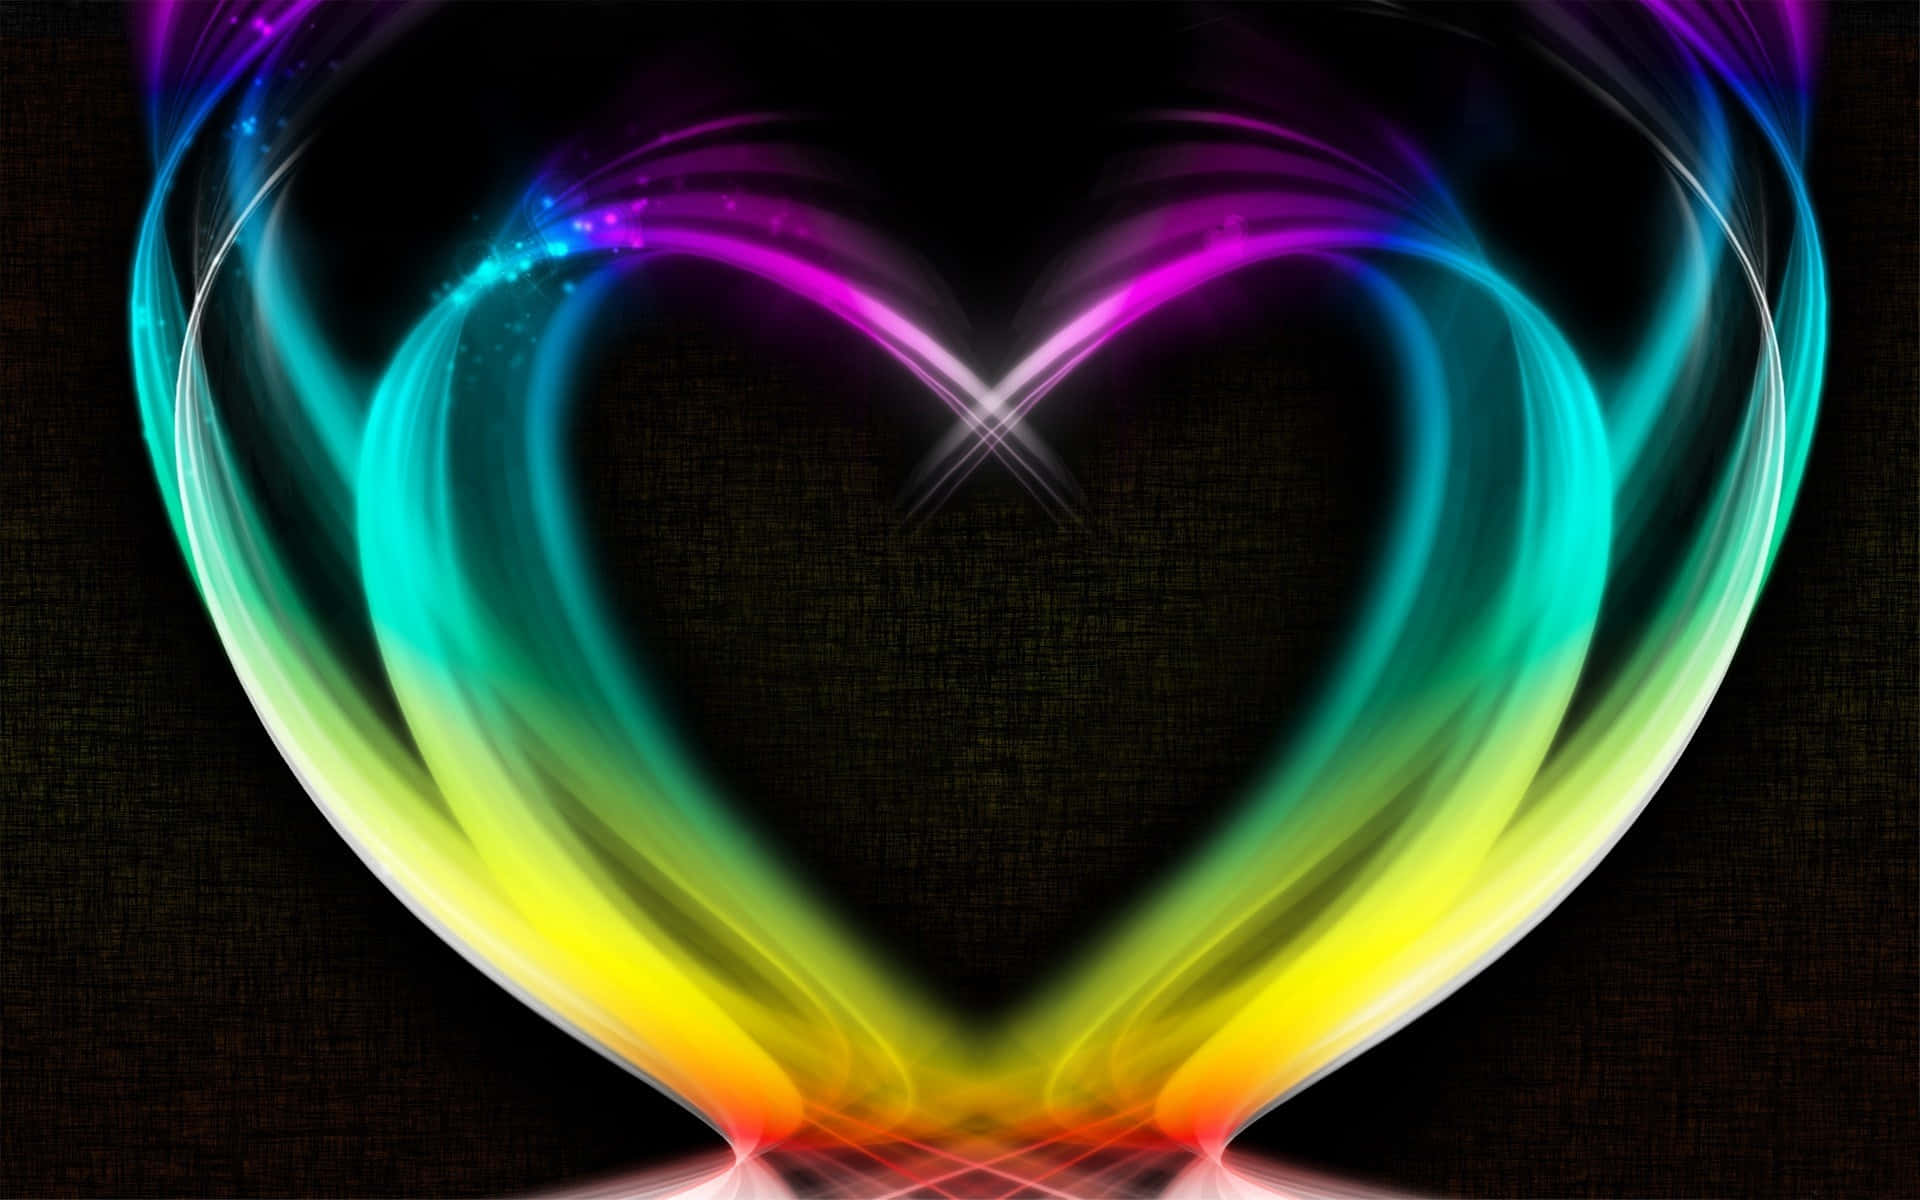 A Colorful Heart Shaped Abstract Art On A Black Background Wallpaper